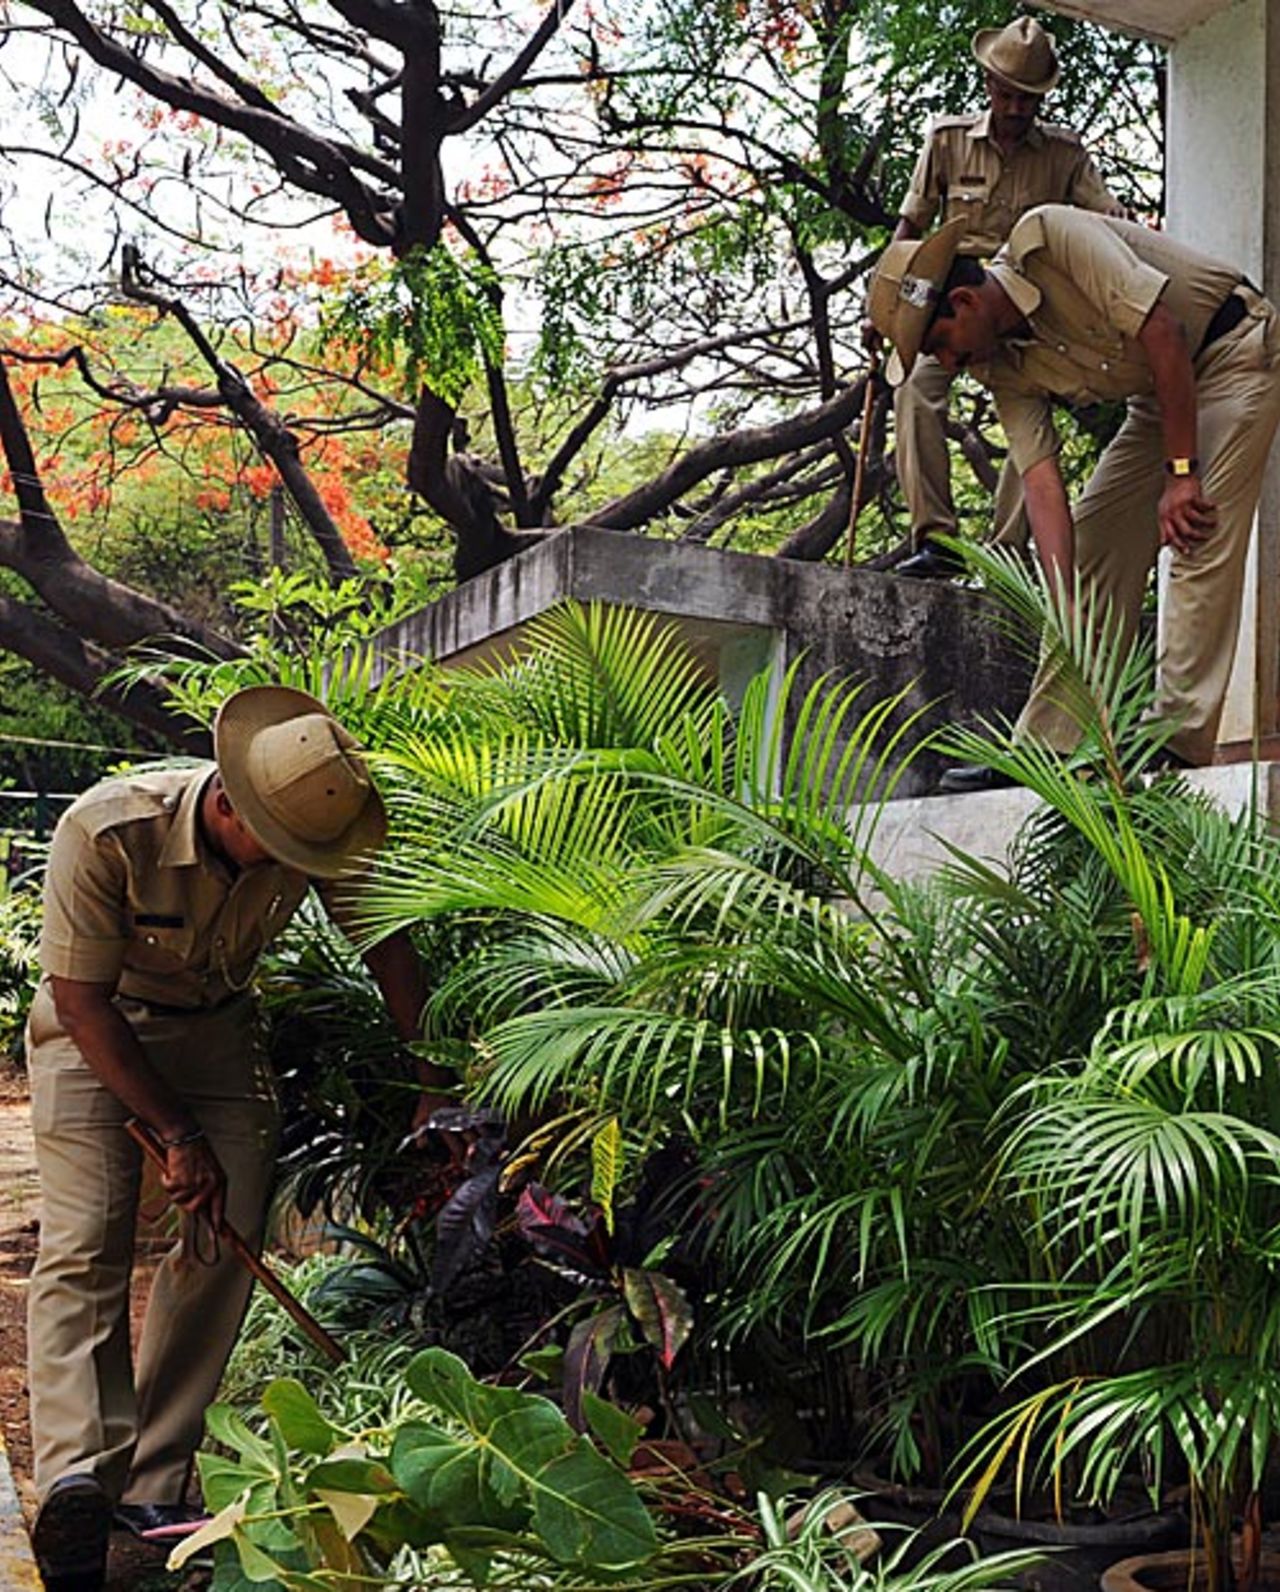 Police search for crude bombs in the area around the Chinnaswamy Stadium, Bangalore, April 18, 2010